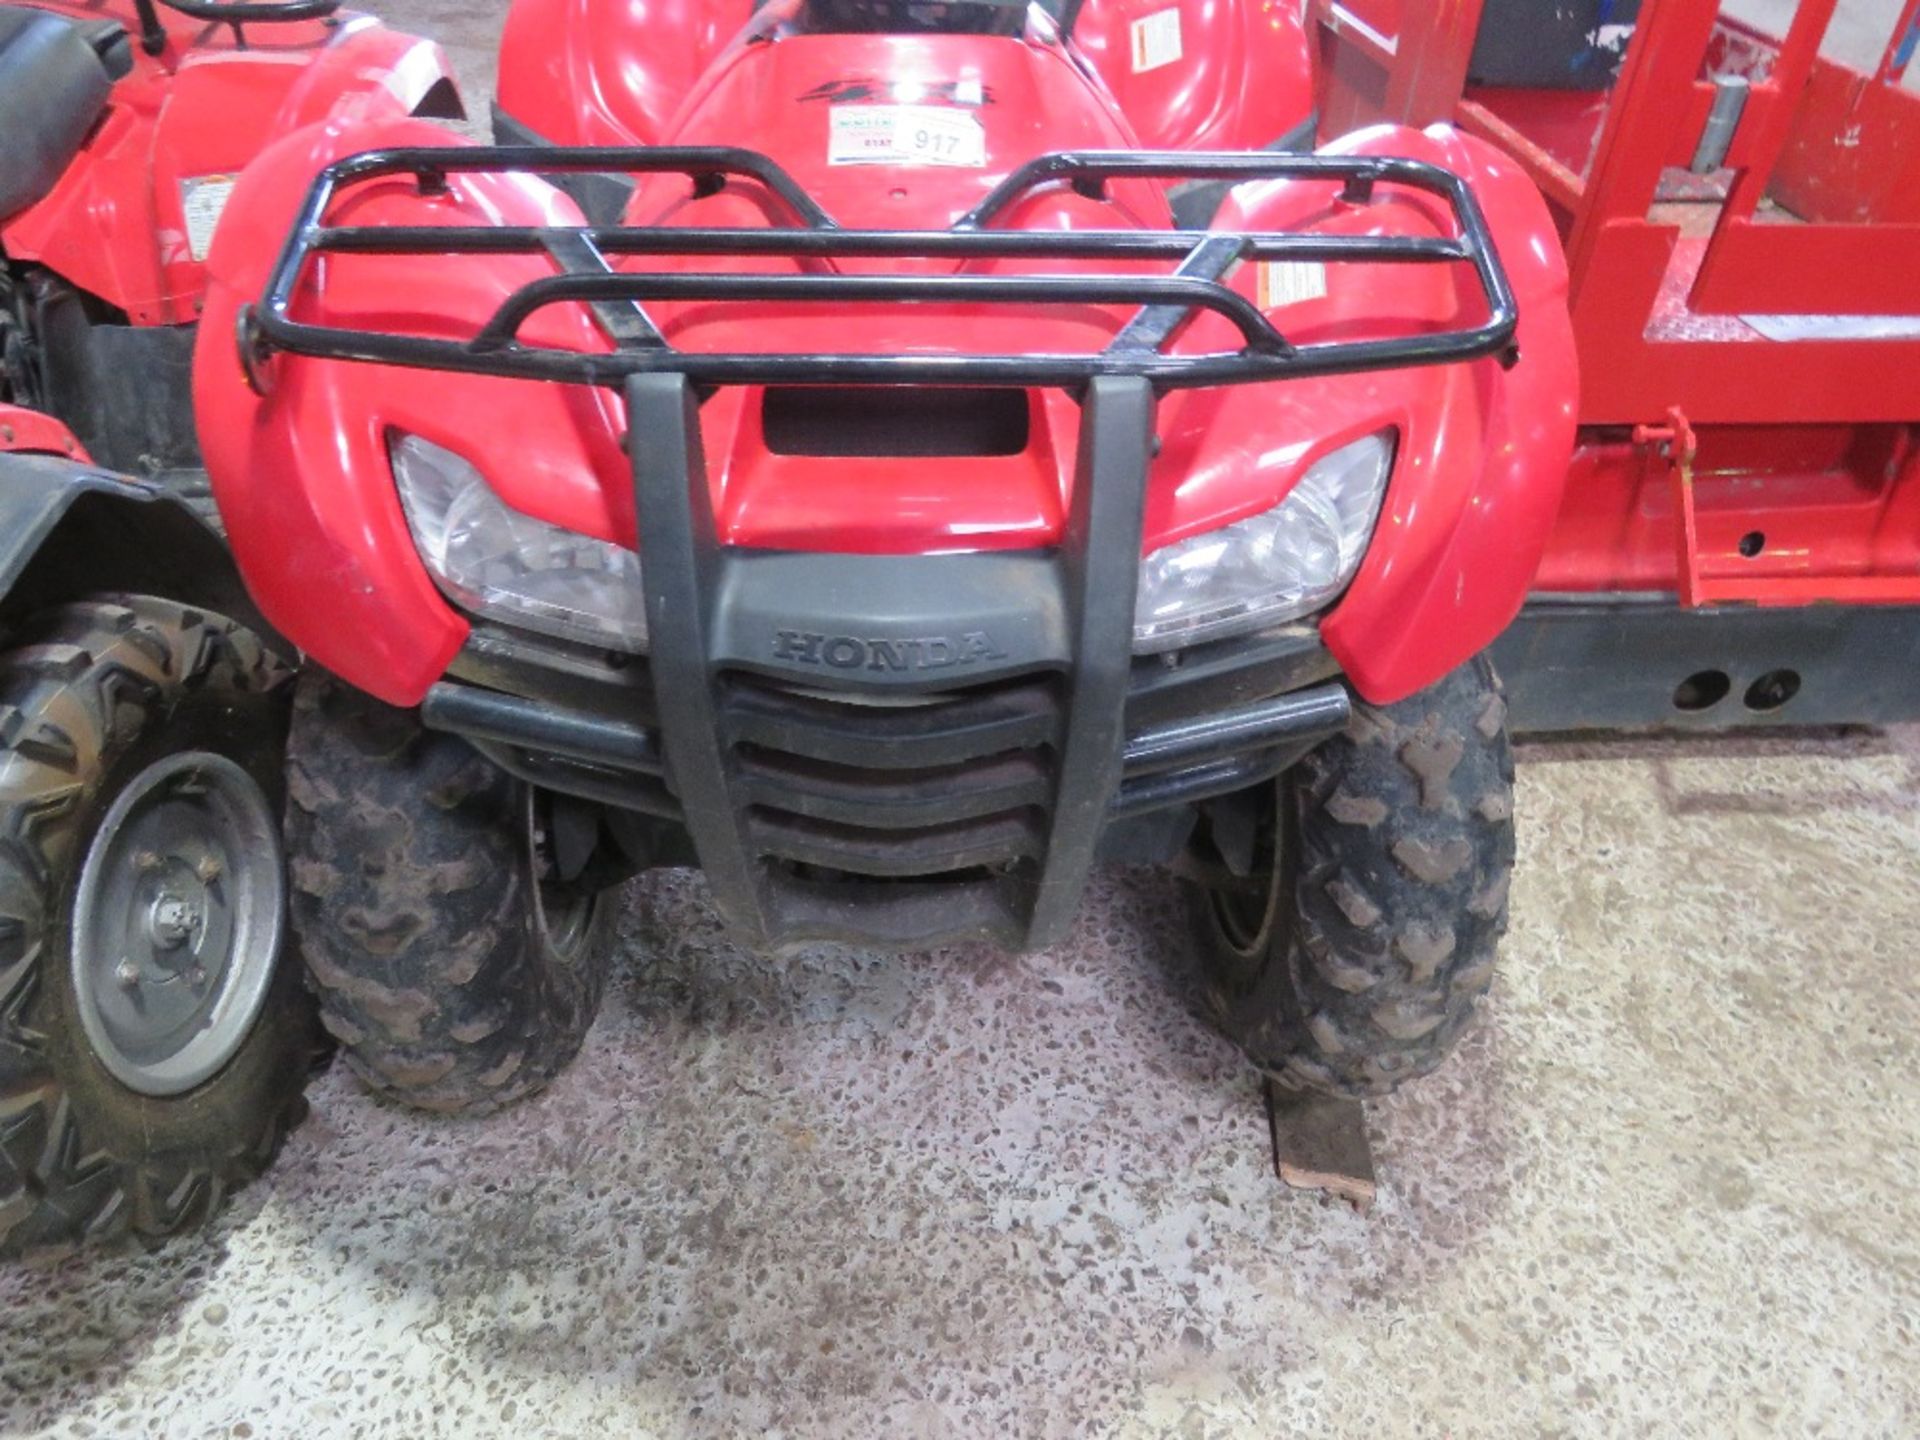 HONDA SELECTABLE 4 WHEEL DRIVE QUAD BIKE WITH ELECTRONIC GEAR SELECTION. WHEN TESTED WAS SEEN TO RUN - Image 5 of 11